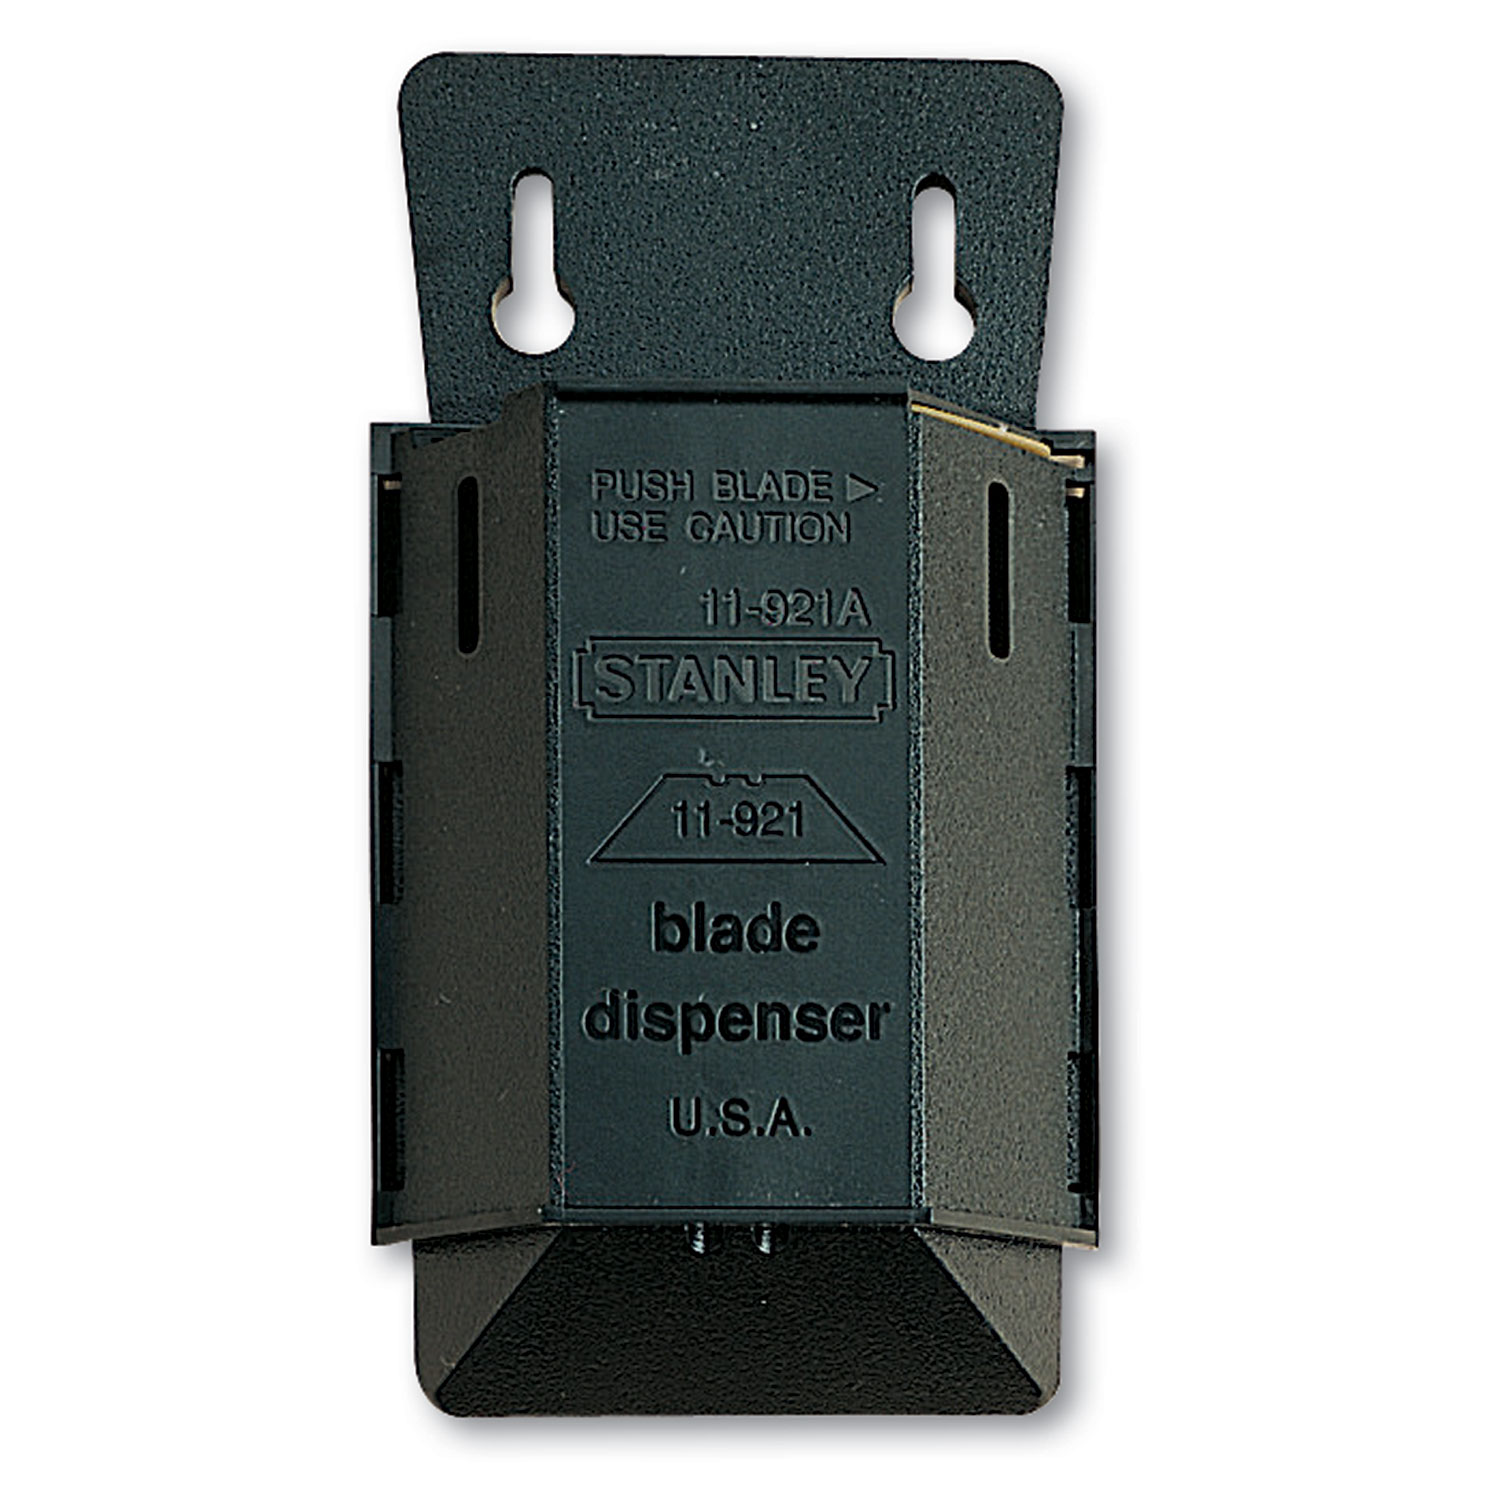 Stanley 11-921A 1992 Heavy Duty Utility Blades w/Dispenser (1 pack 100 Blades) - image 2 of 3